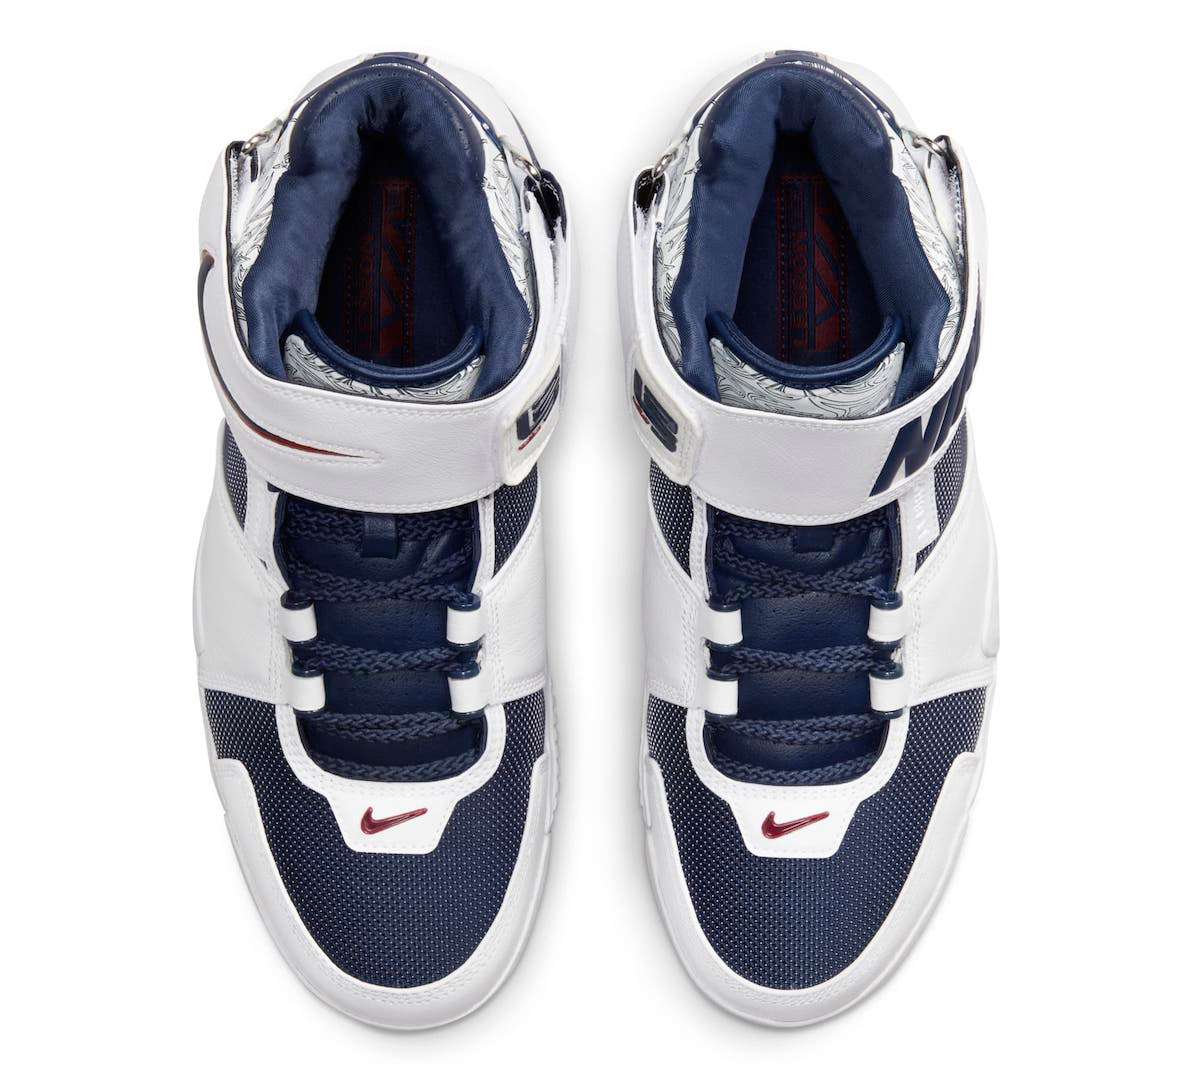 Nike-LeBron-2-USA-Midnight-Navy-Release-Date-5